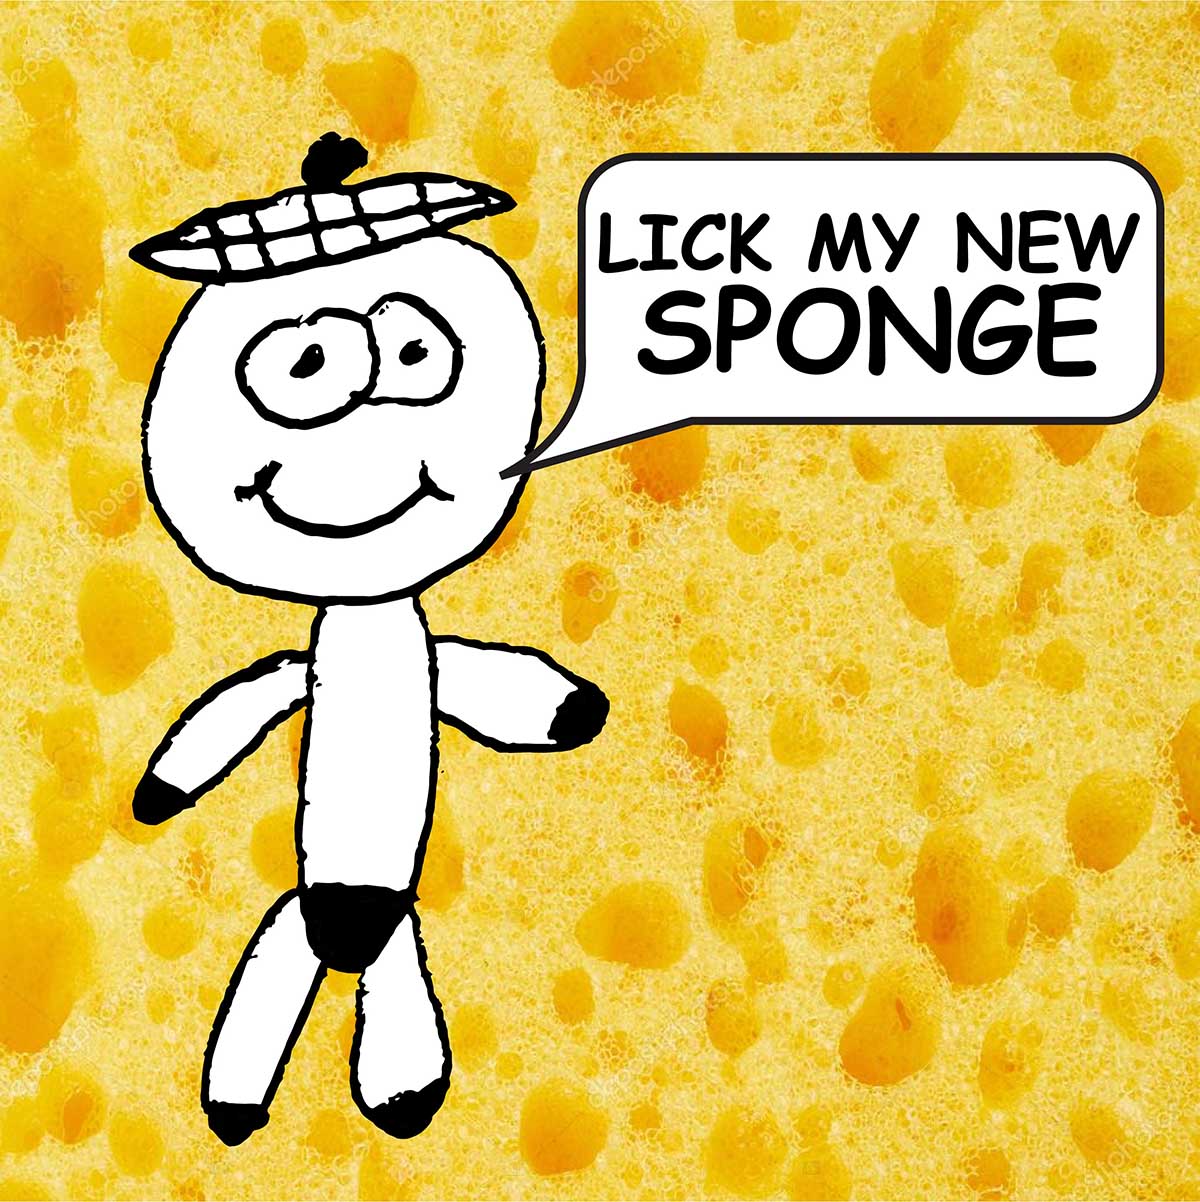 Cartoon Figure named Buddy with speach bubble saying lick my new sponge